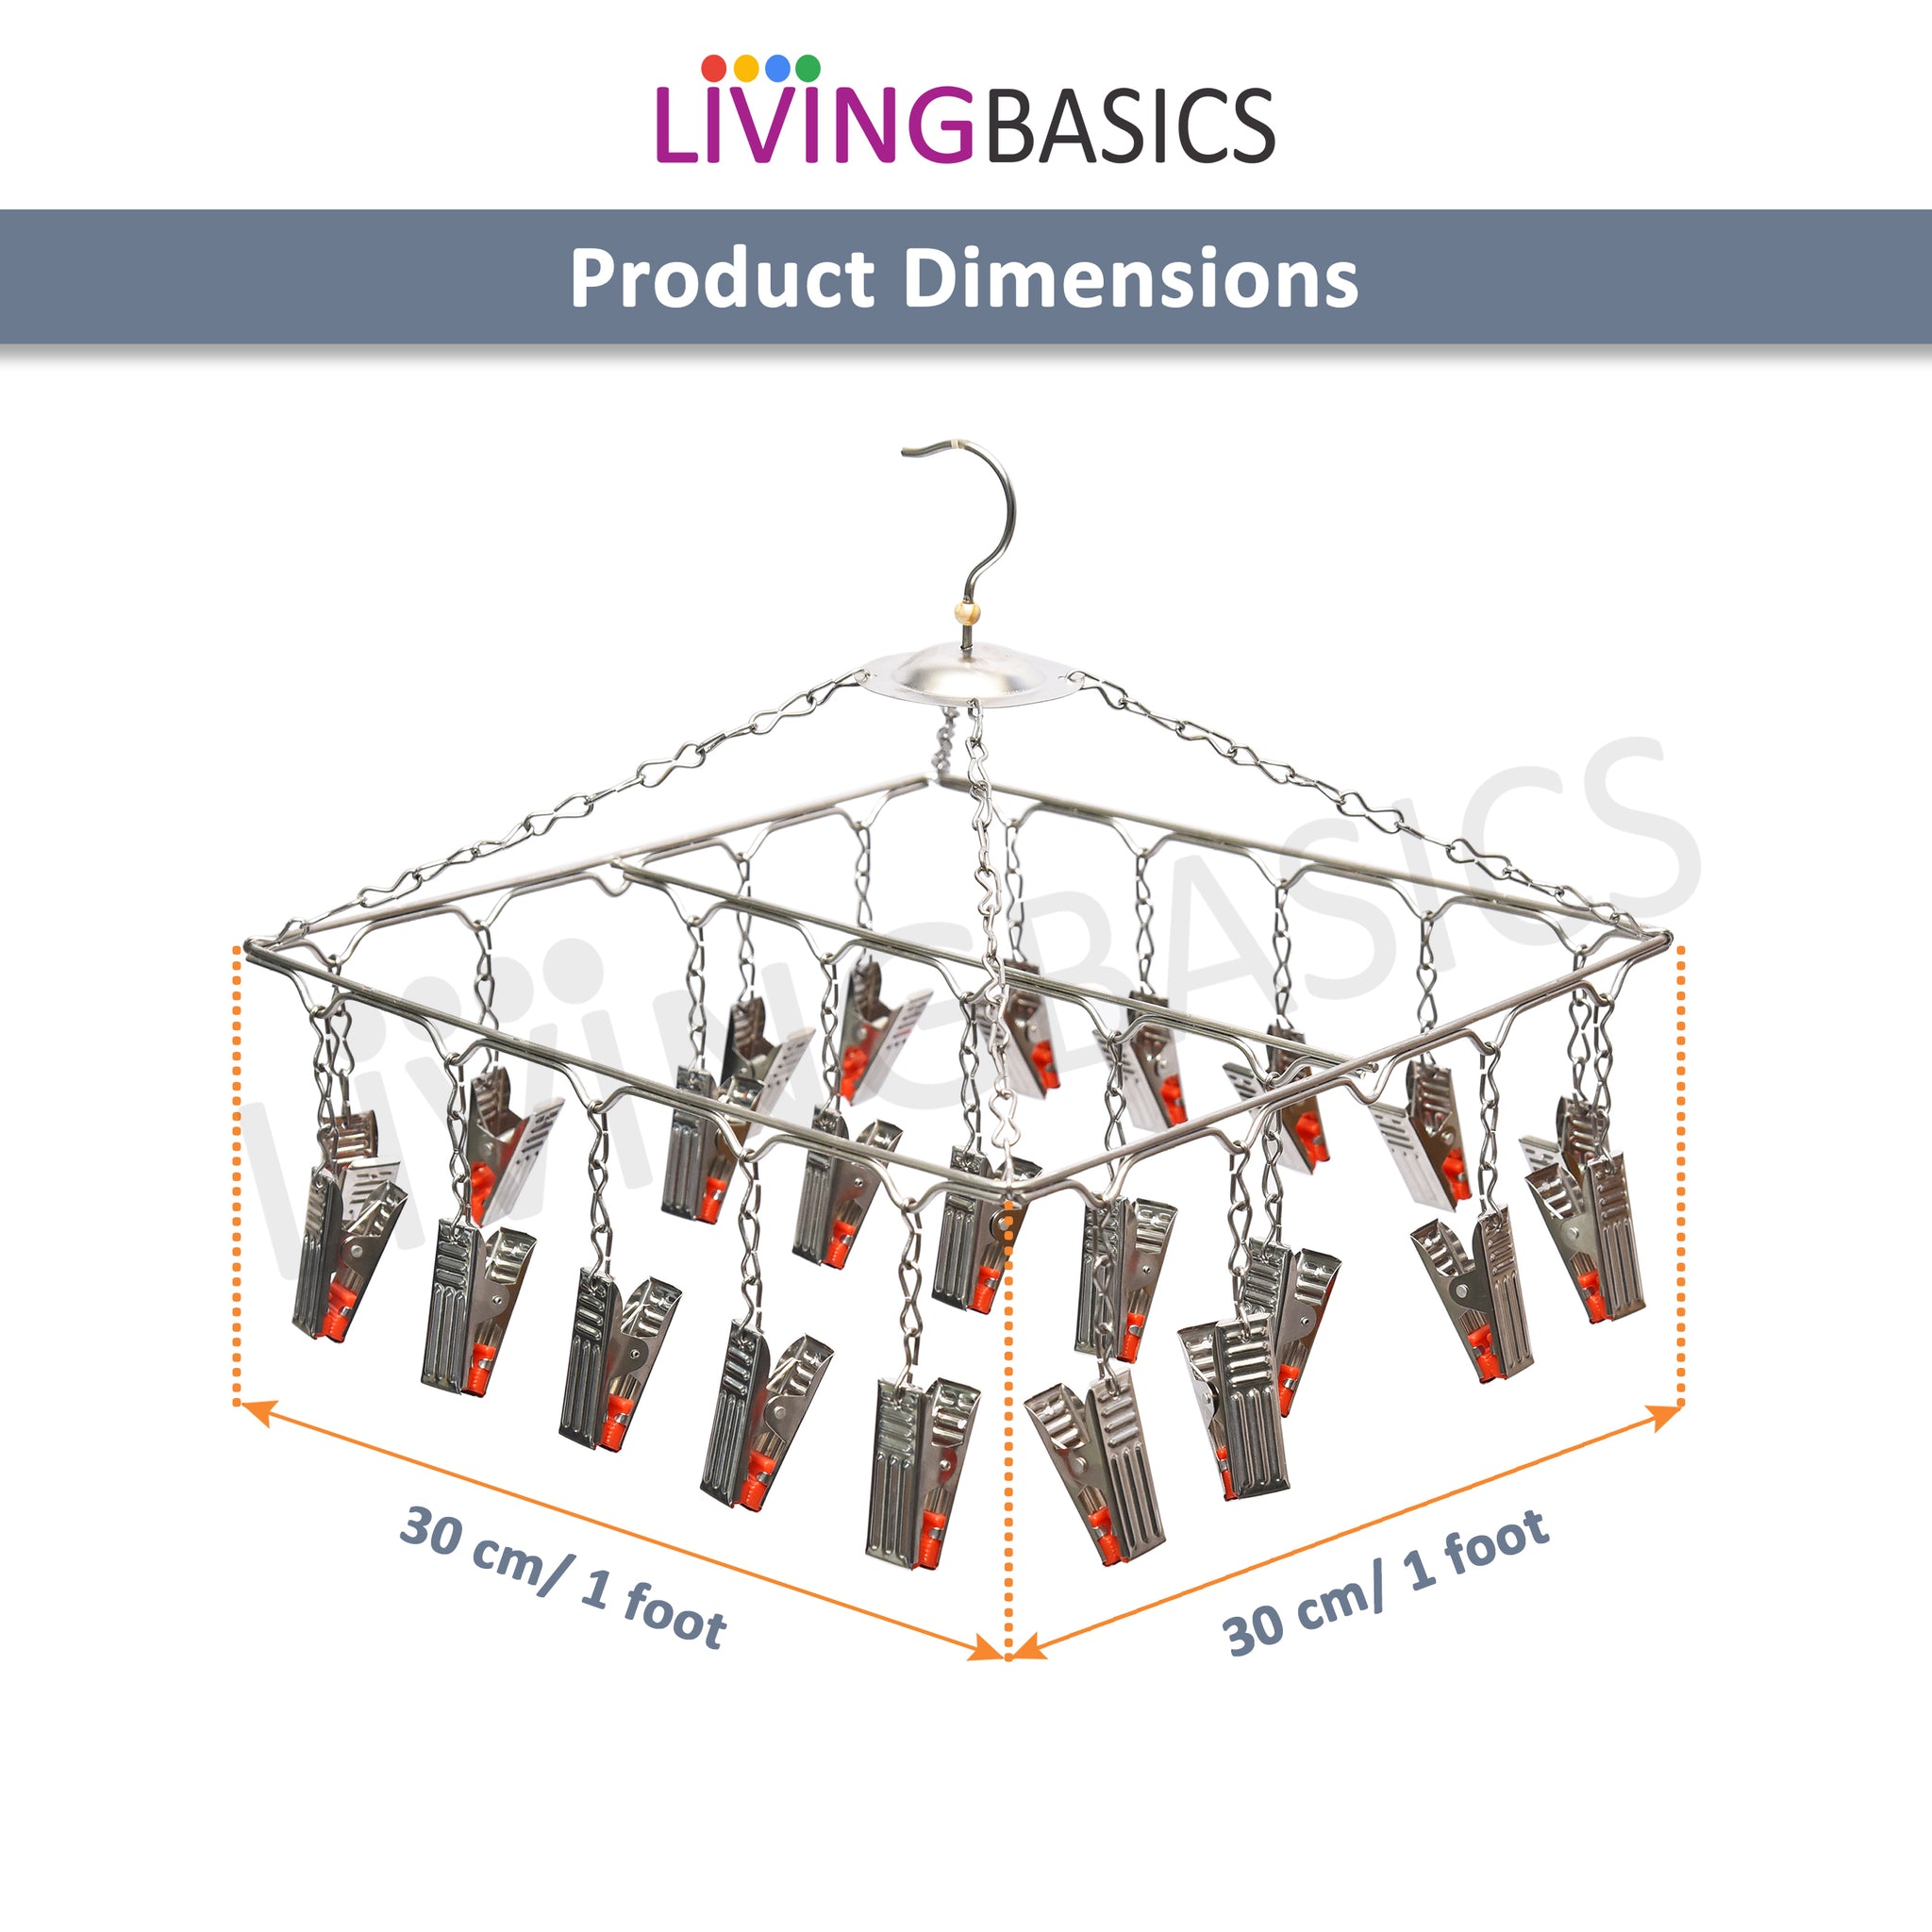 LivingBasics Stainless Steel Baby Cloth Clips Hanger with Drying Pins/Pegs for Rods/Ropes - Clothes Dryer Rack for Socks, Nappies, Hand Towel, Mask, Tie, Lingerie (25 Clip Hanger)